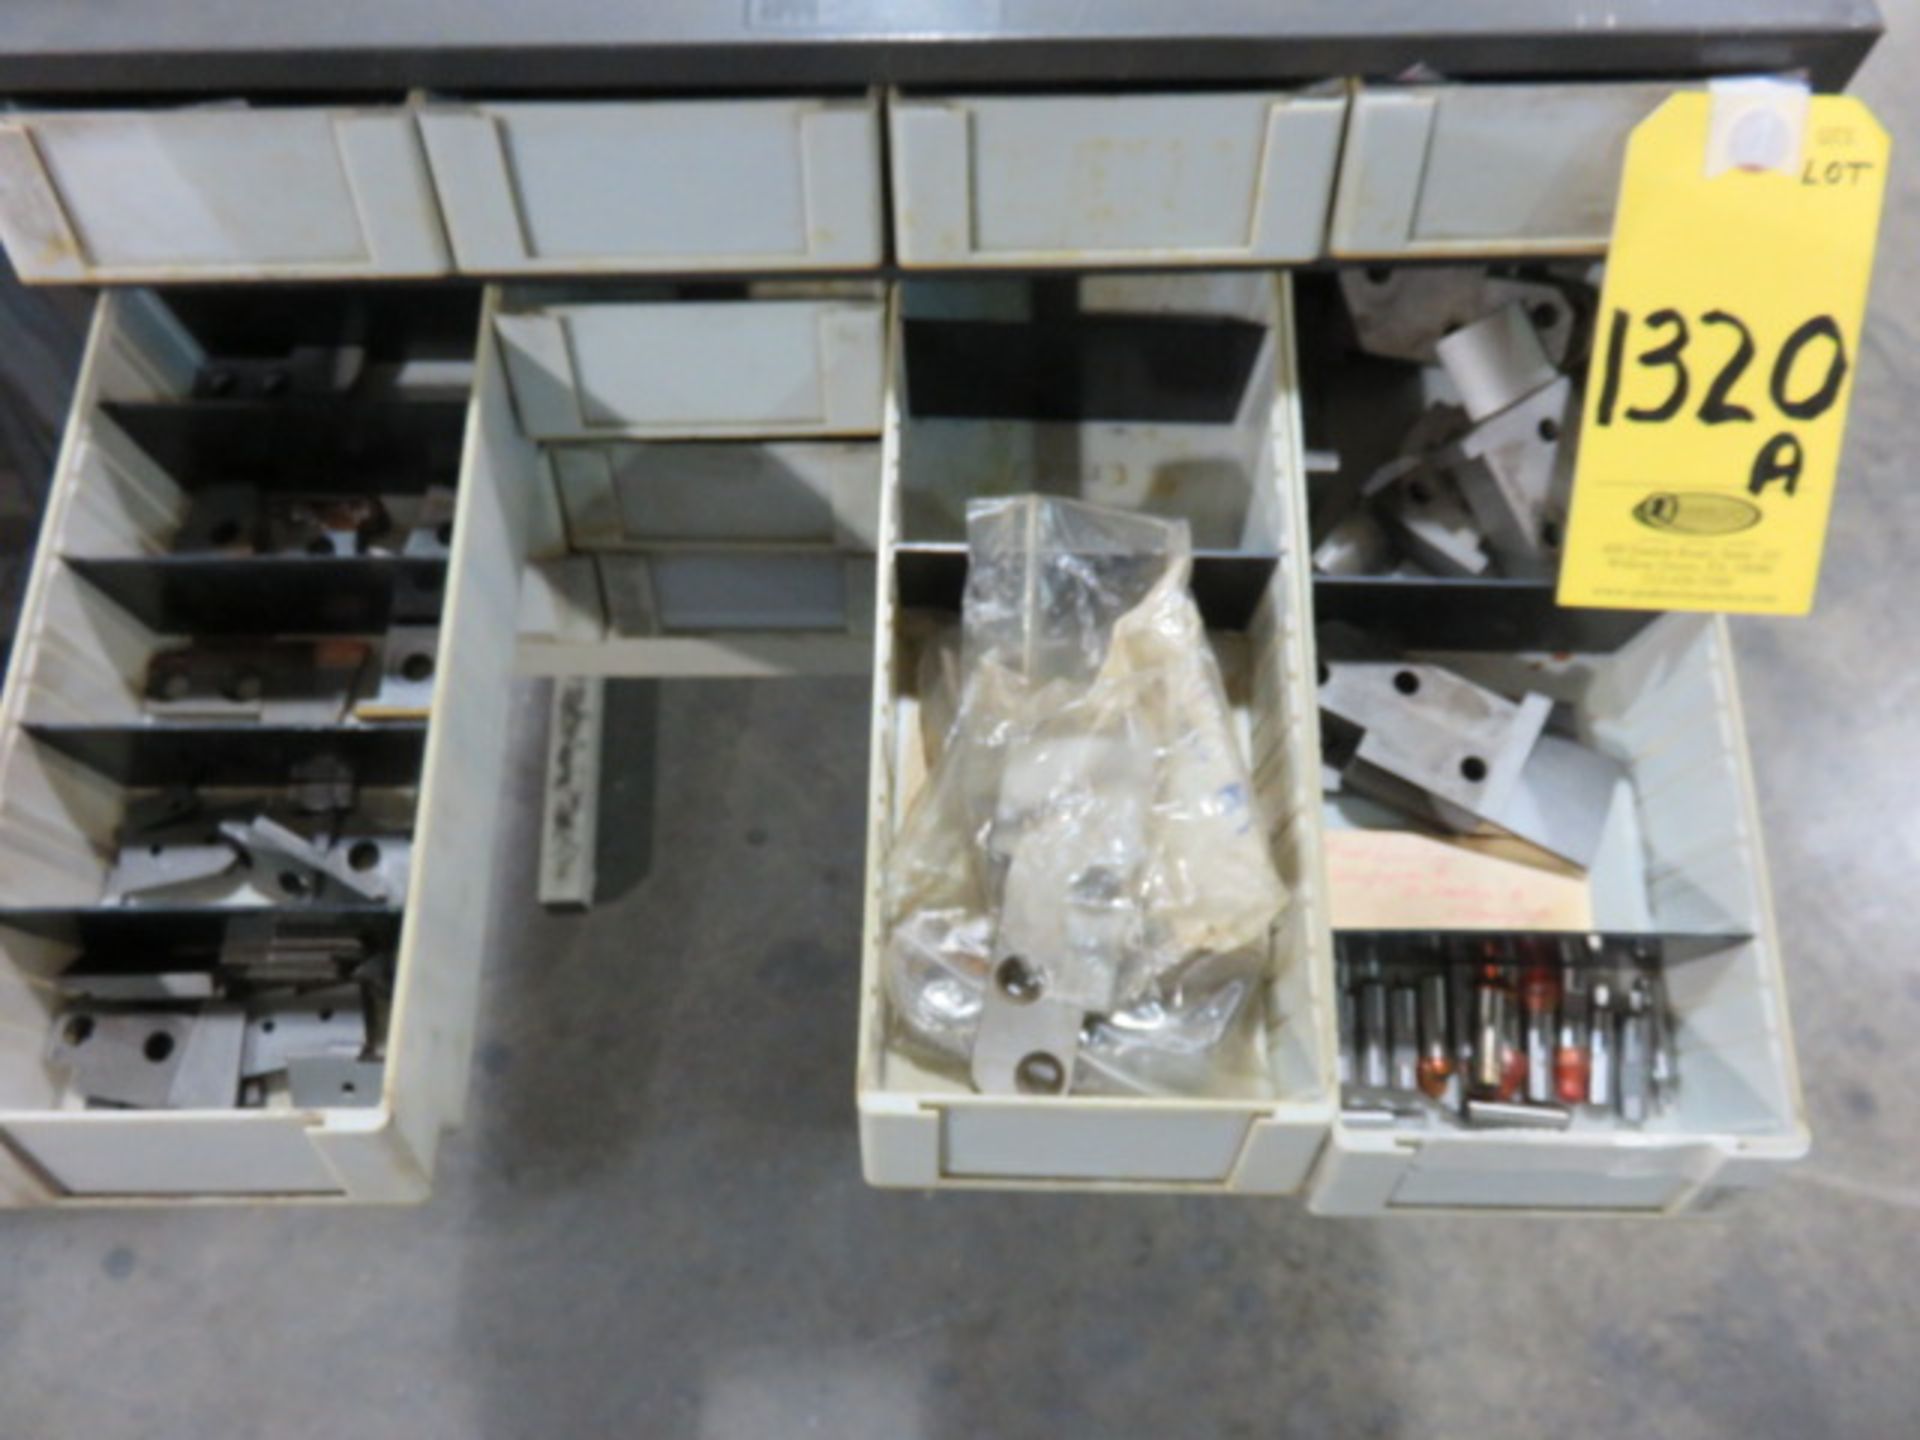 CUT-OFF BLADES FOR LATHE TOOLS W/ CABINET-FITS IN LOTS 1313,1314,1320 - Image 3 of 5